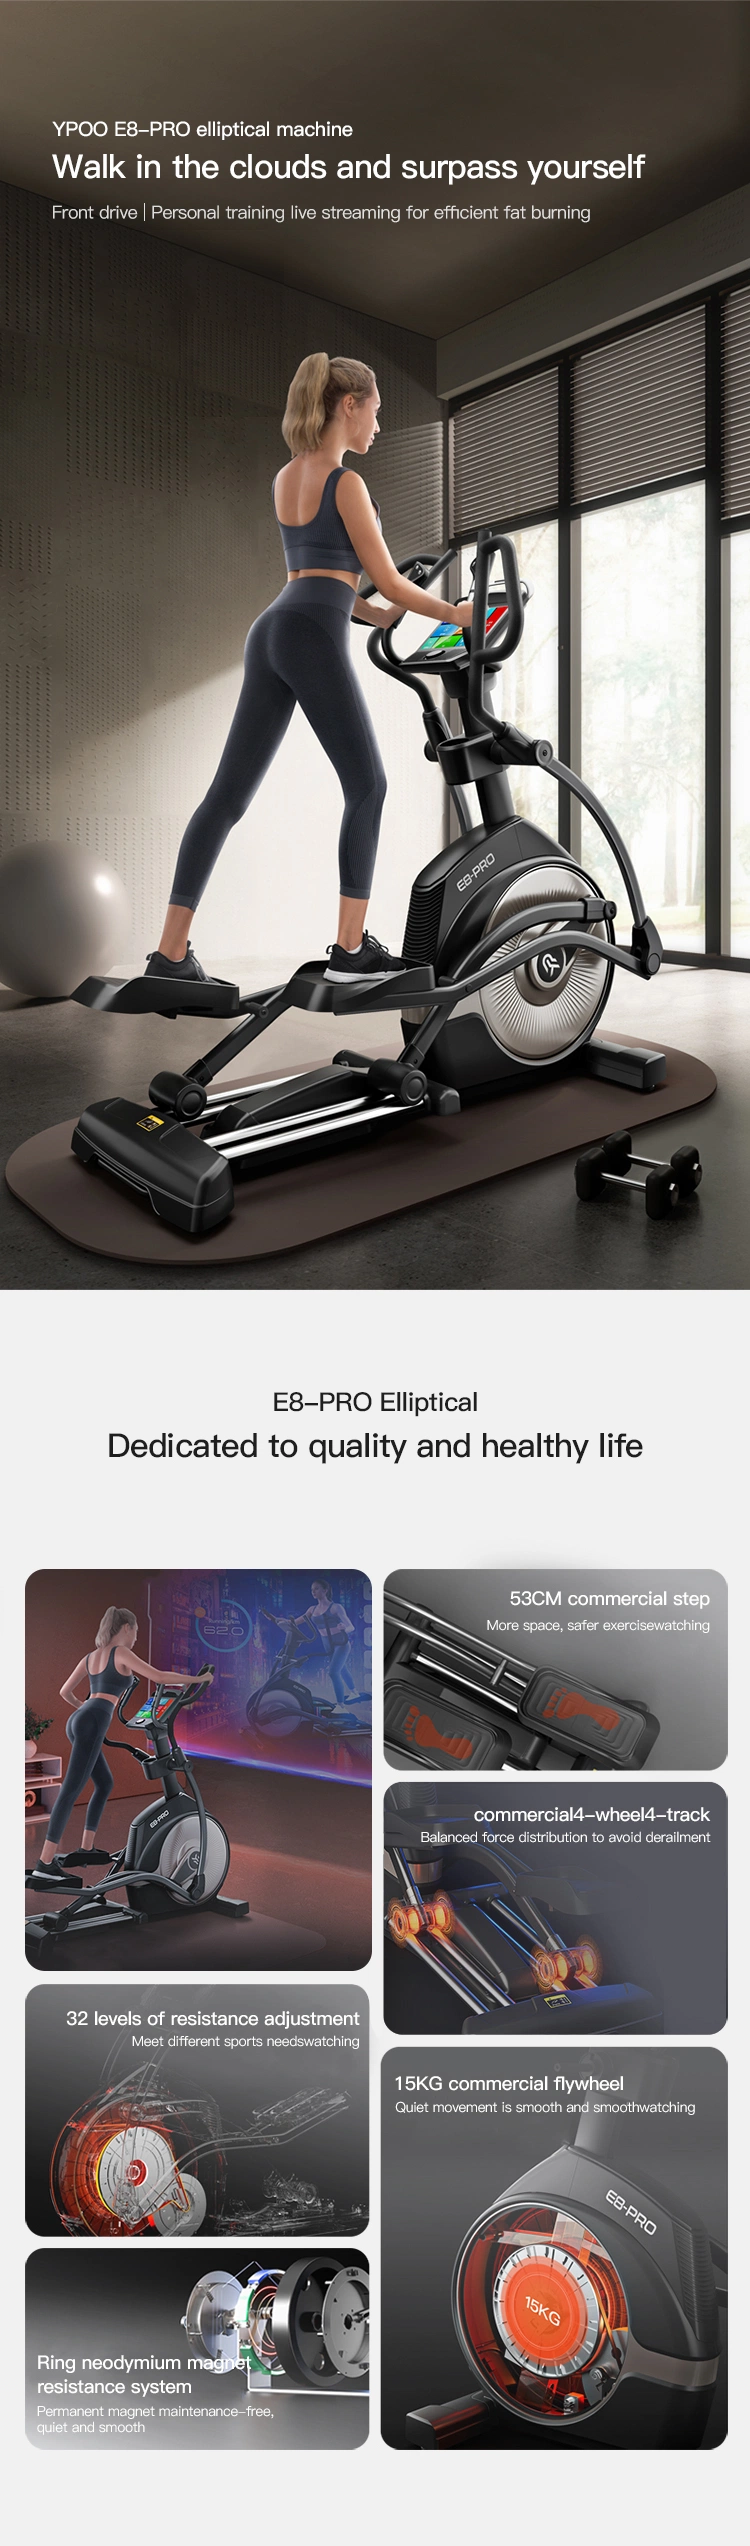 Ypoo Fitness Equipment Cross Trainer Elliptical E8 Home Gym Magnetic Ellipticals Trainers with Yifit APP